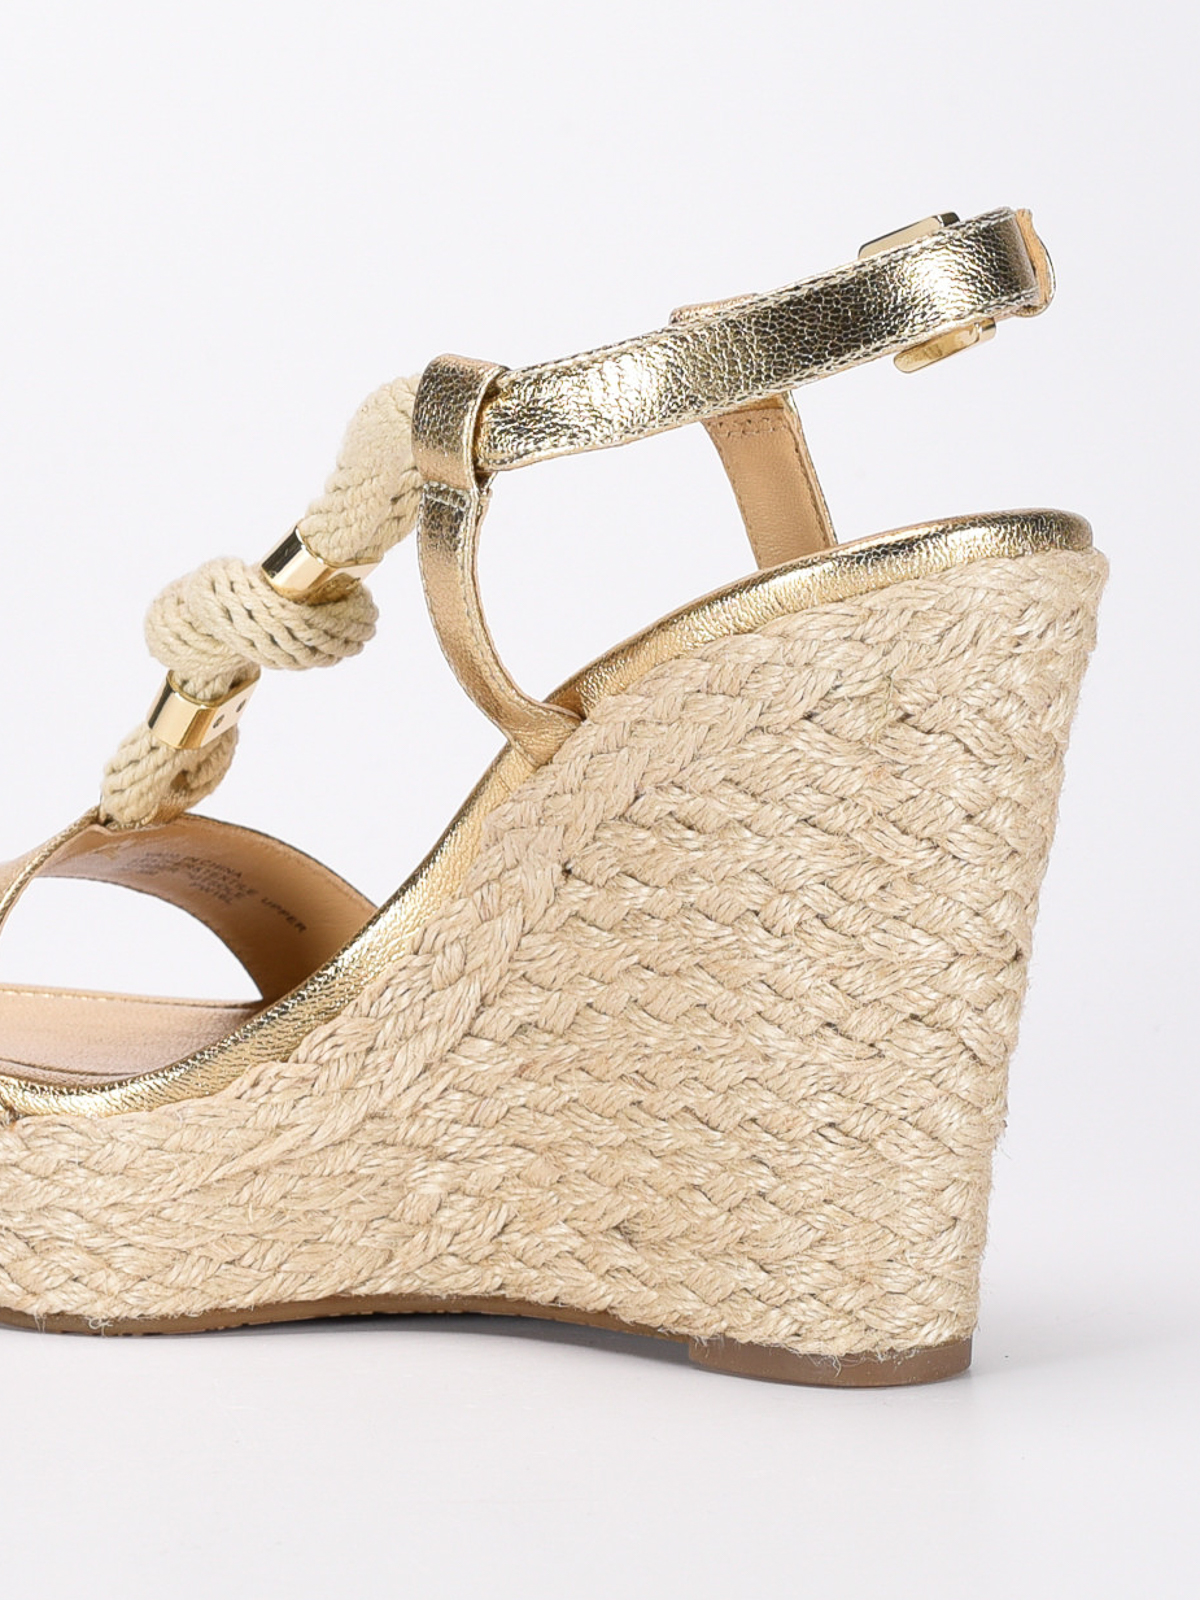 Sandals Michael Kors - Holly knot detail wedges - 40S7HOHA2M 